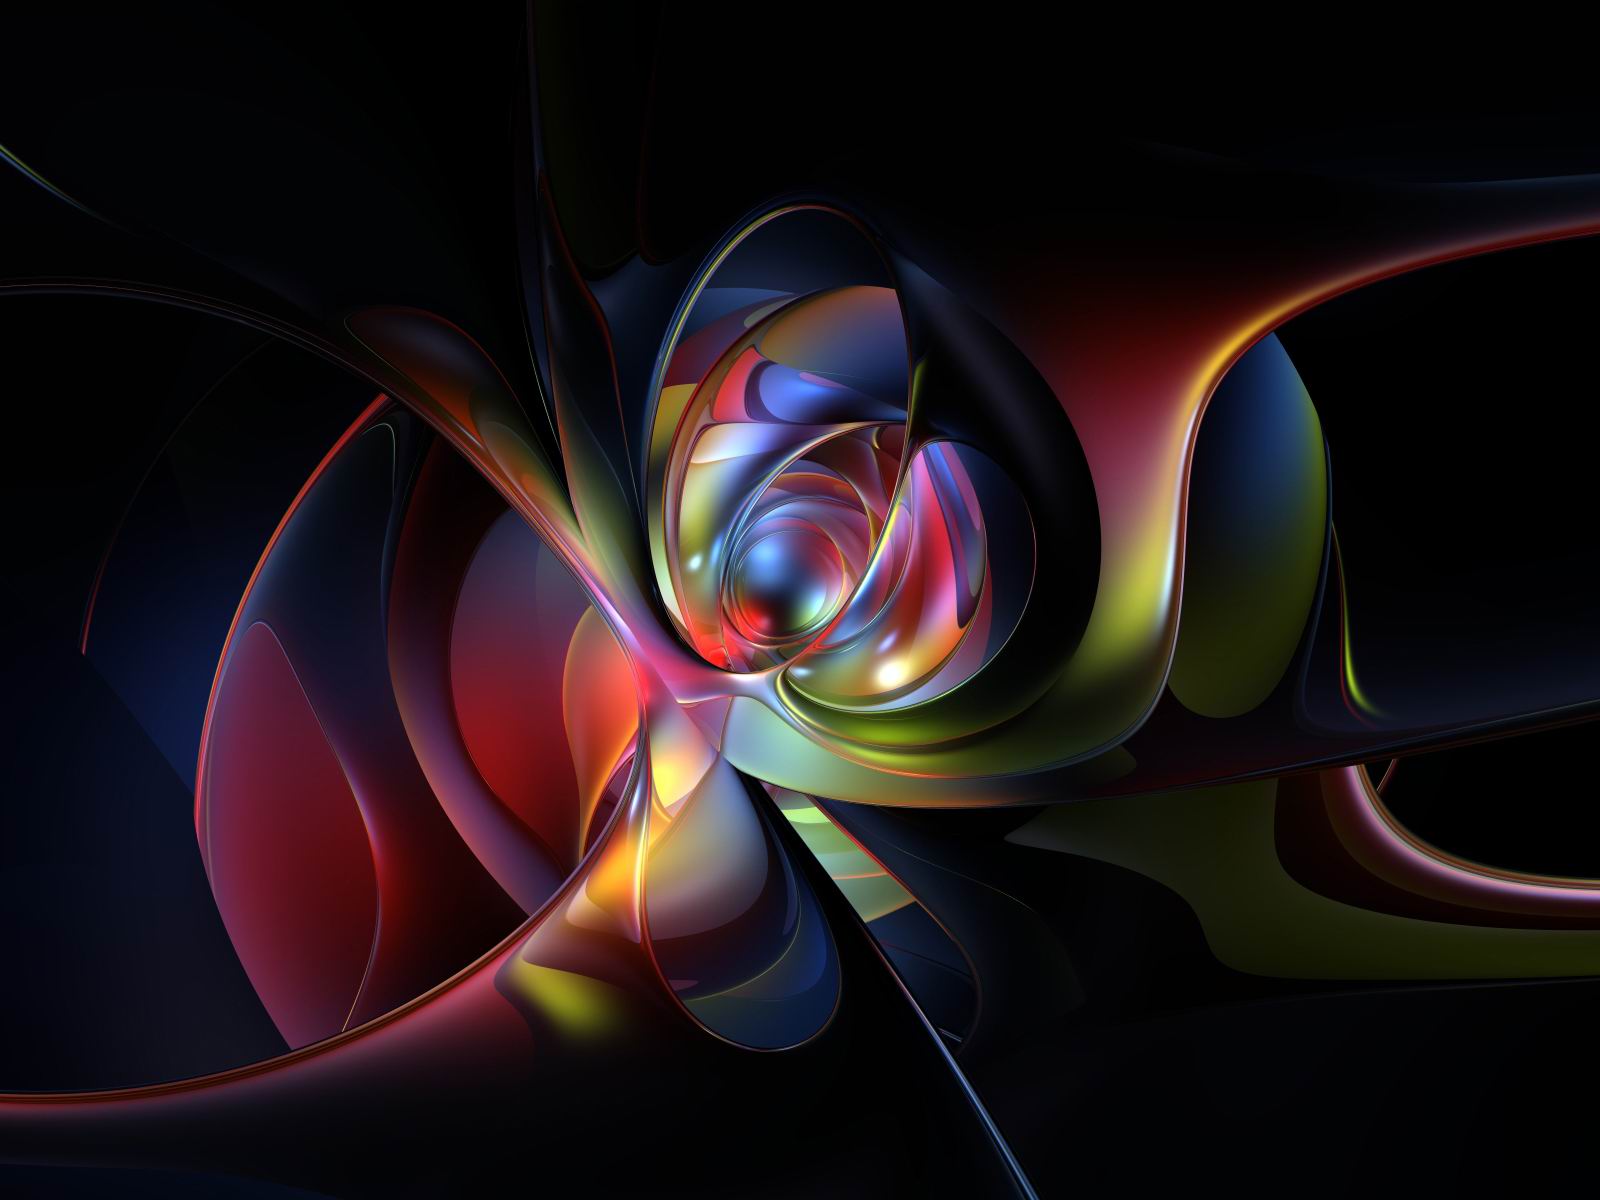 Download full size Abstract wallpaper / 3d And Digital Art / 1600x1200